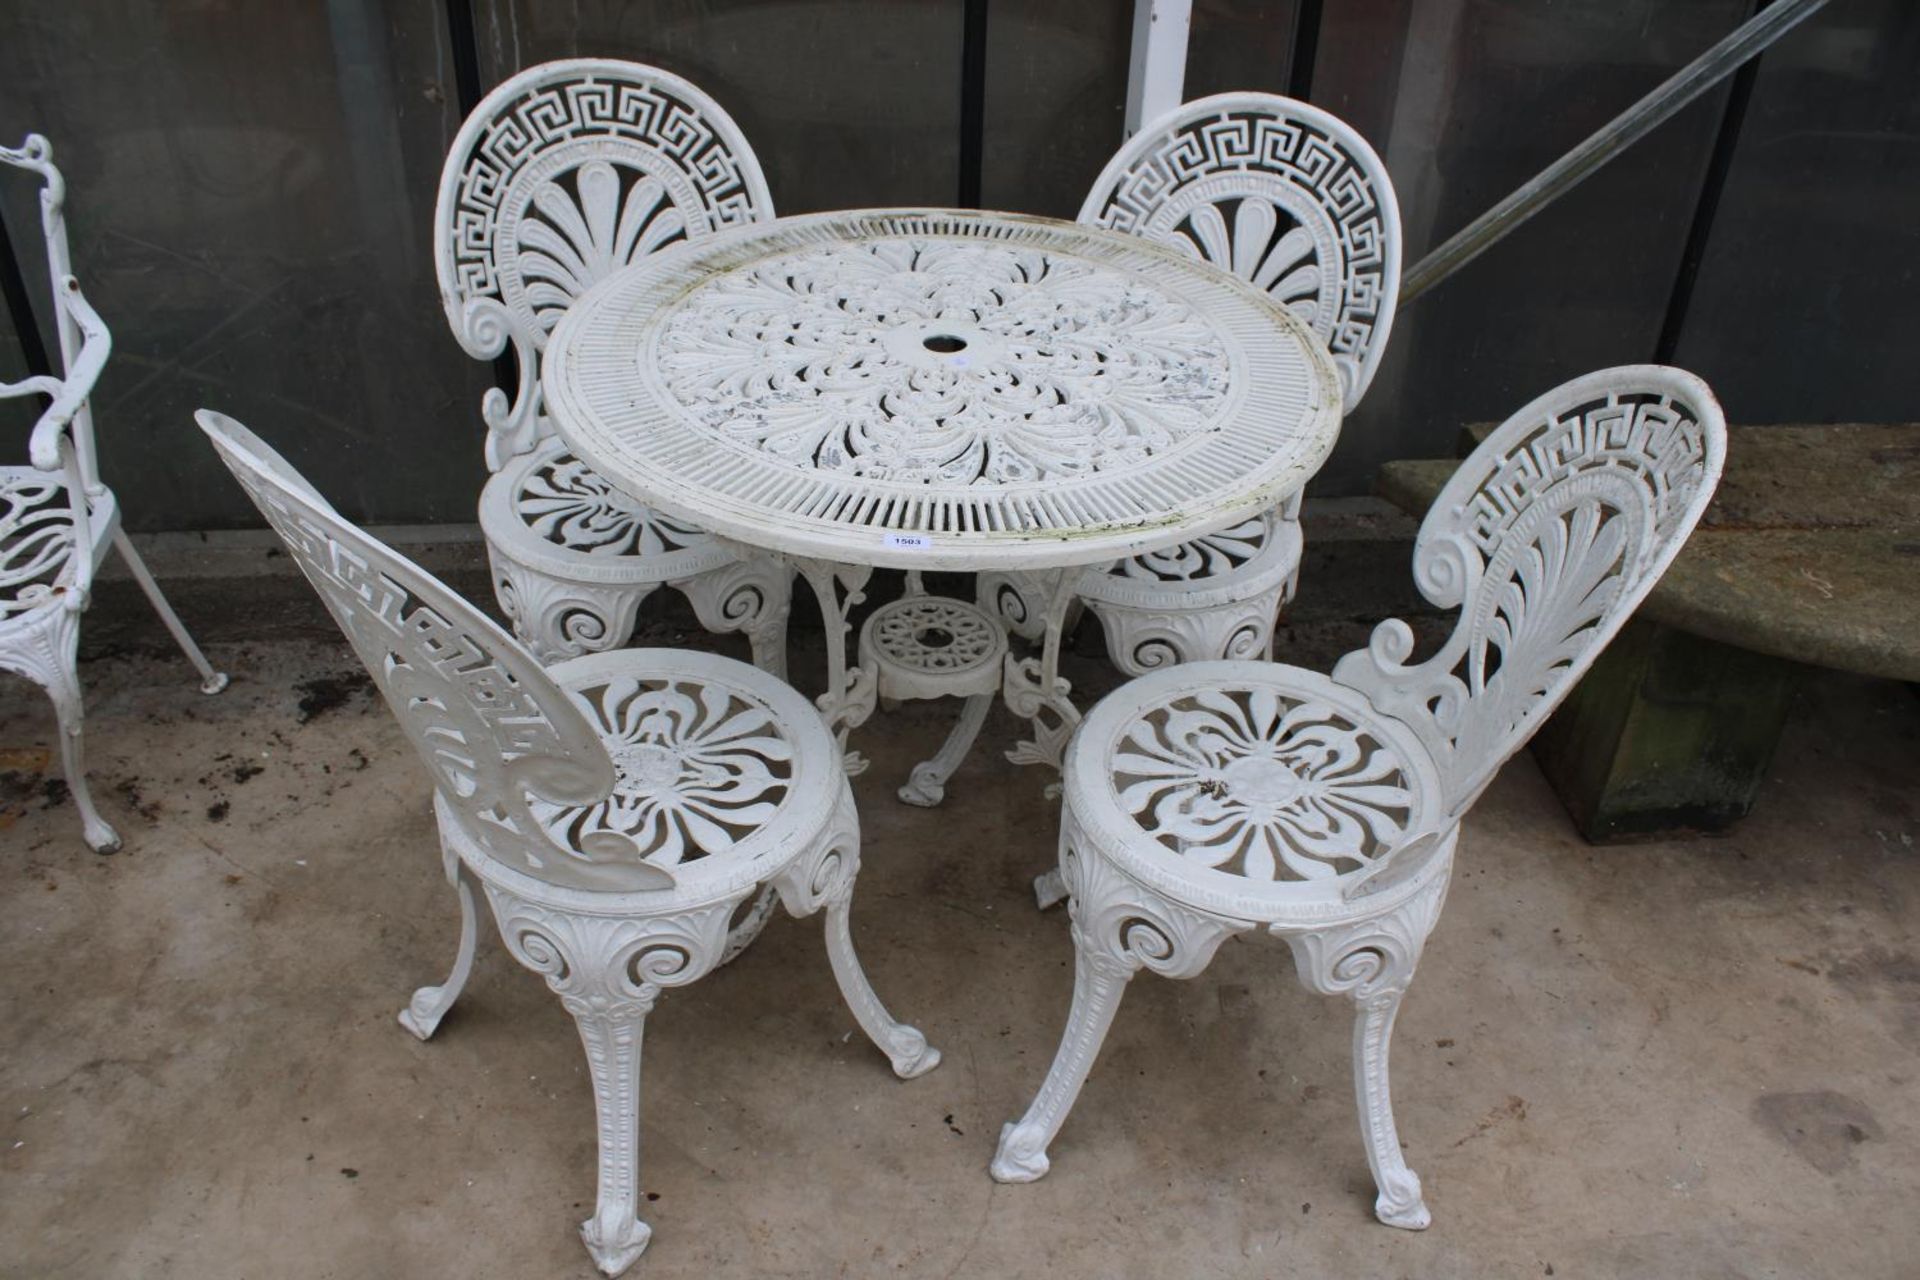 A VINTAGE CAST ALLOY BISTRO SET COMPRISING OF A ROUND TABLE AND FOUR CHAIRS - Image 2 of 6